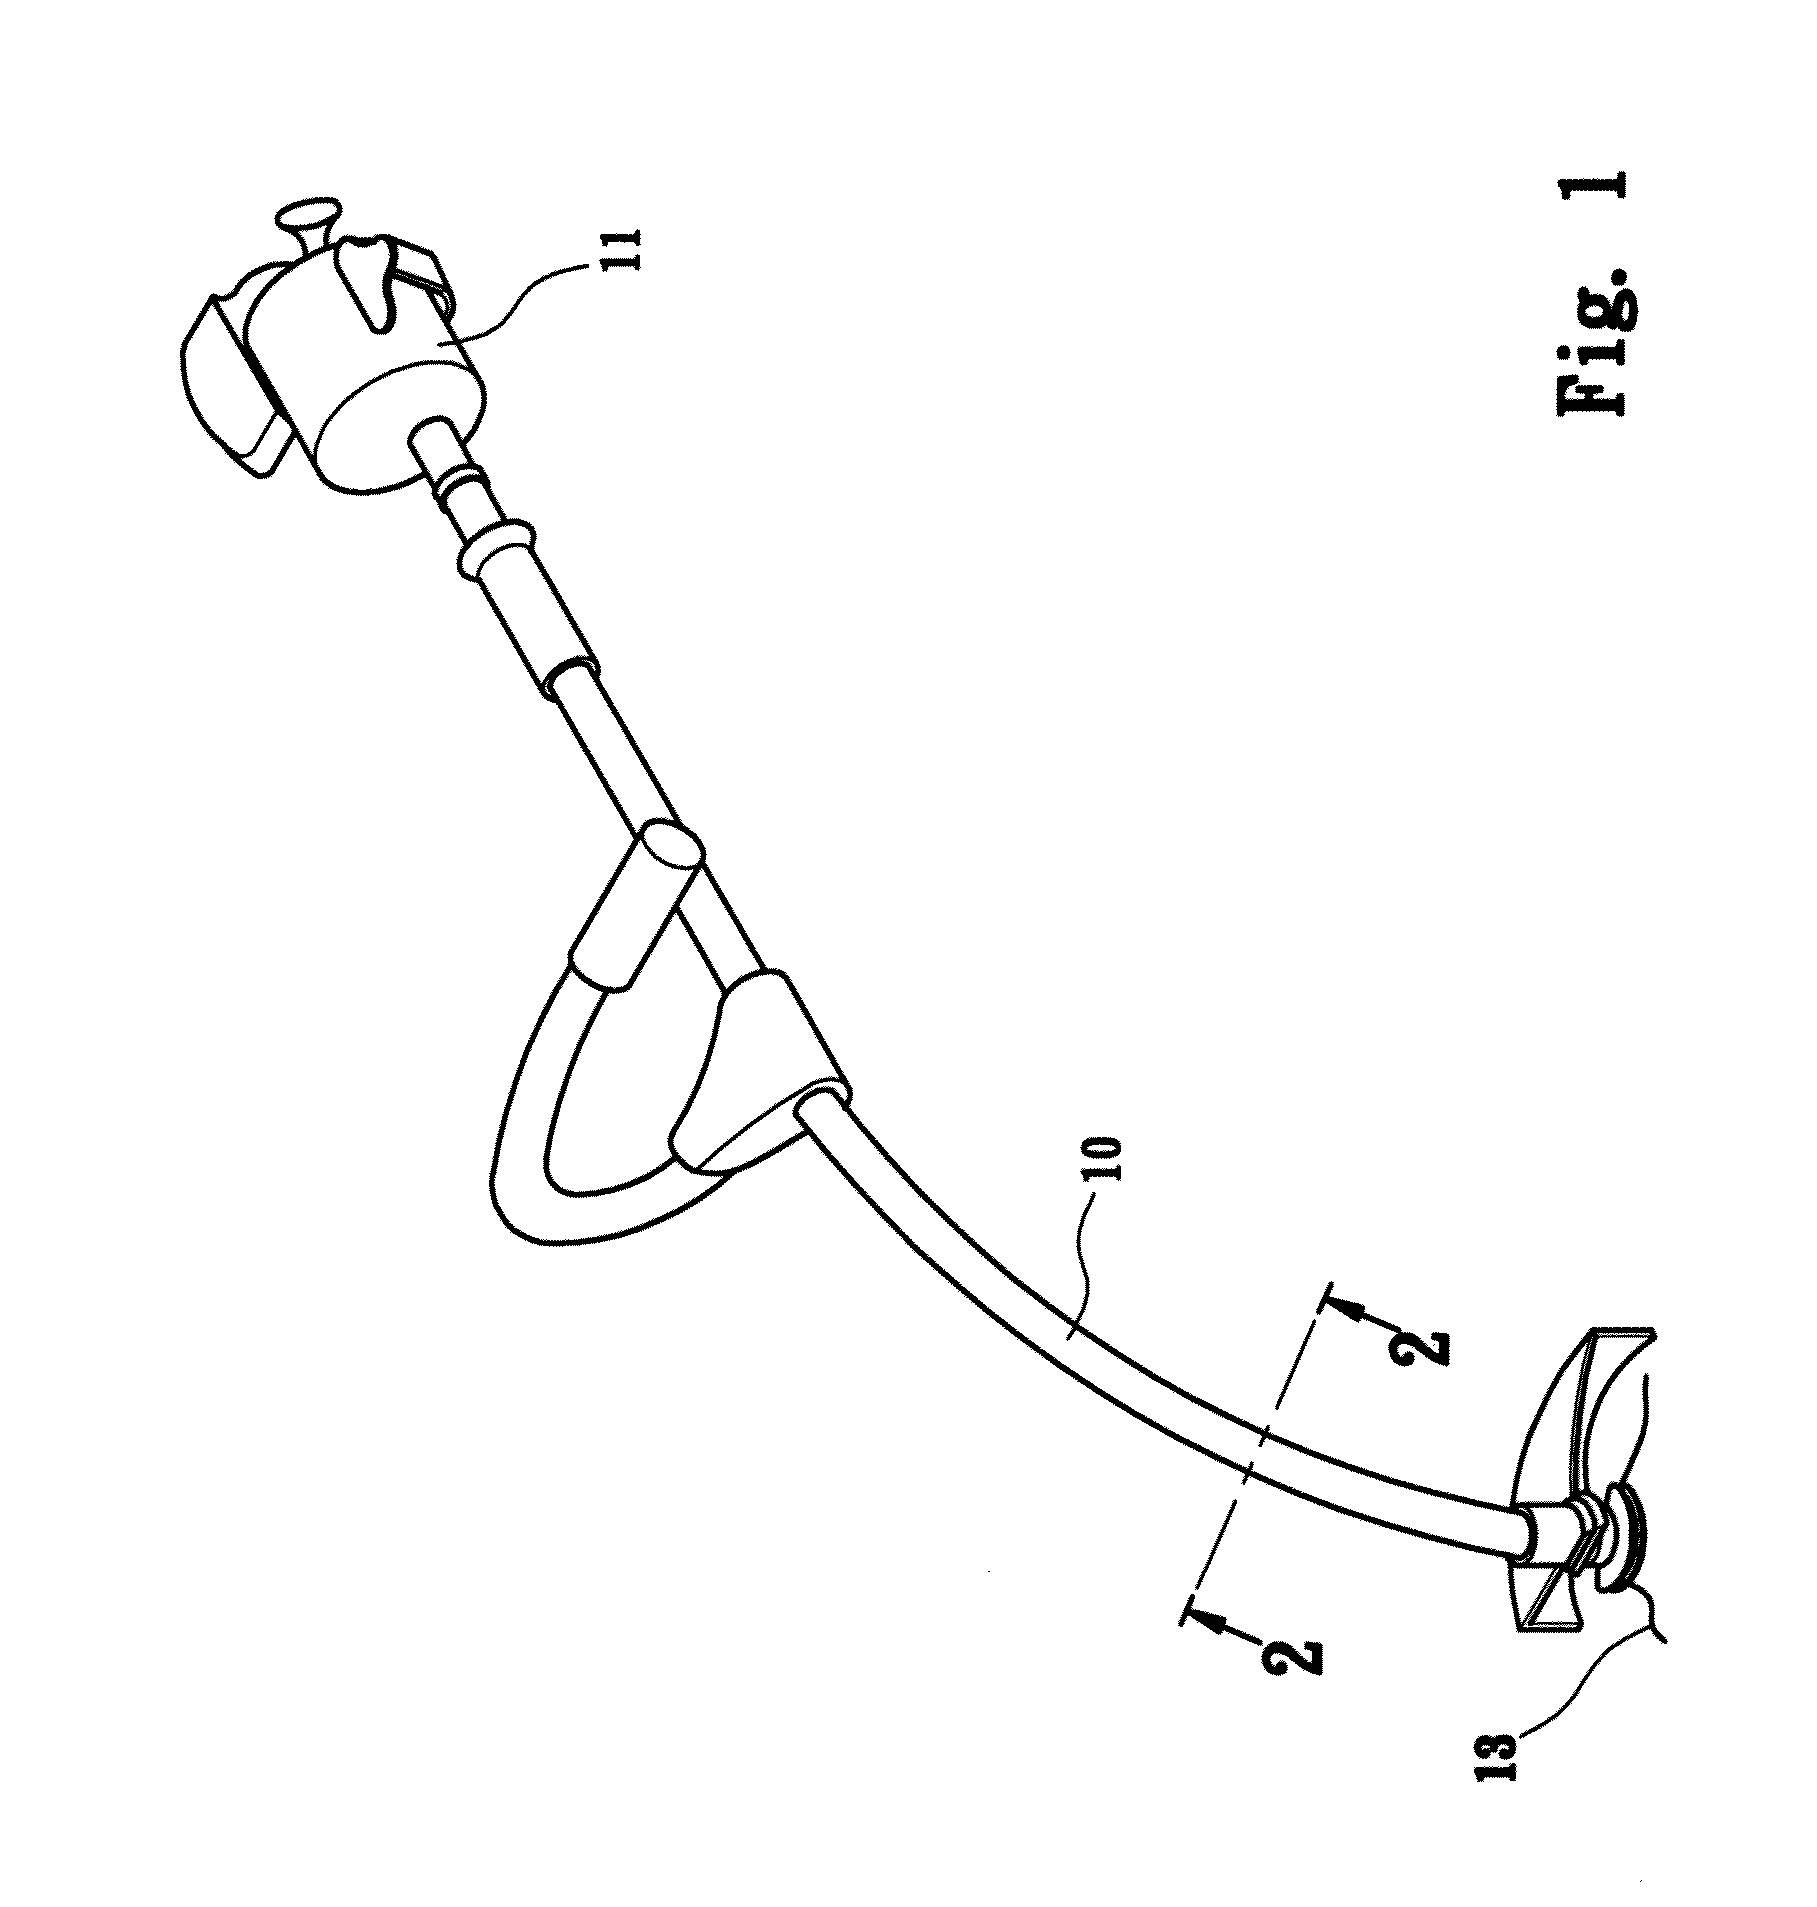 Positioning tube of a vegetation cutter